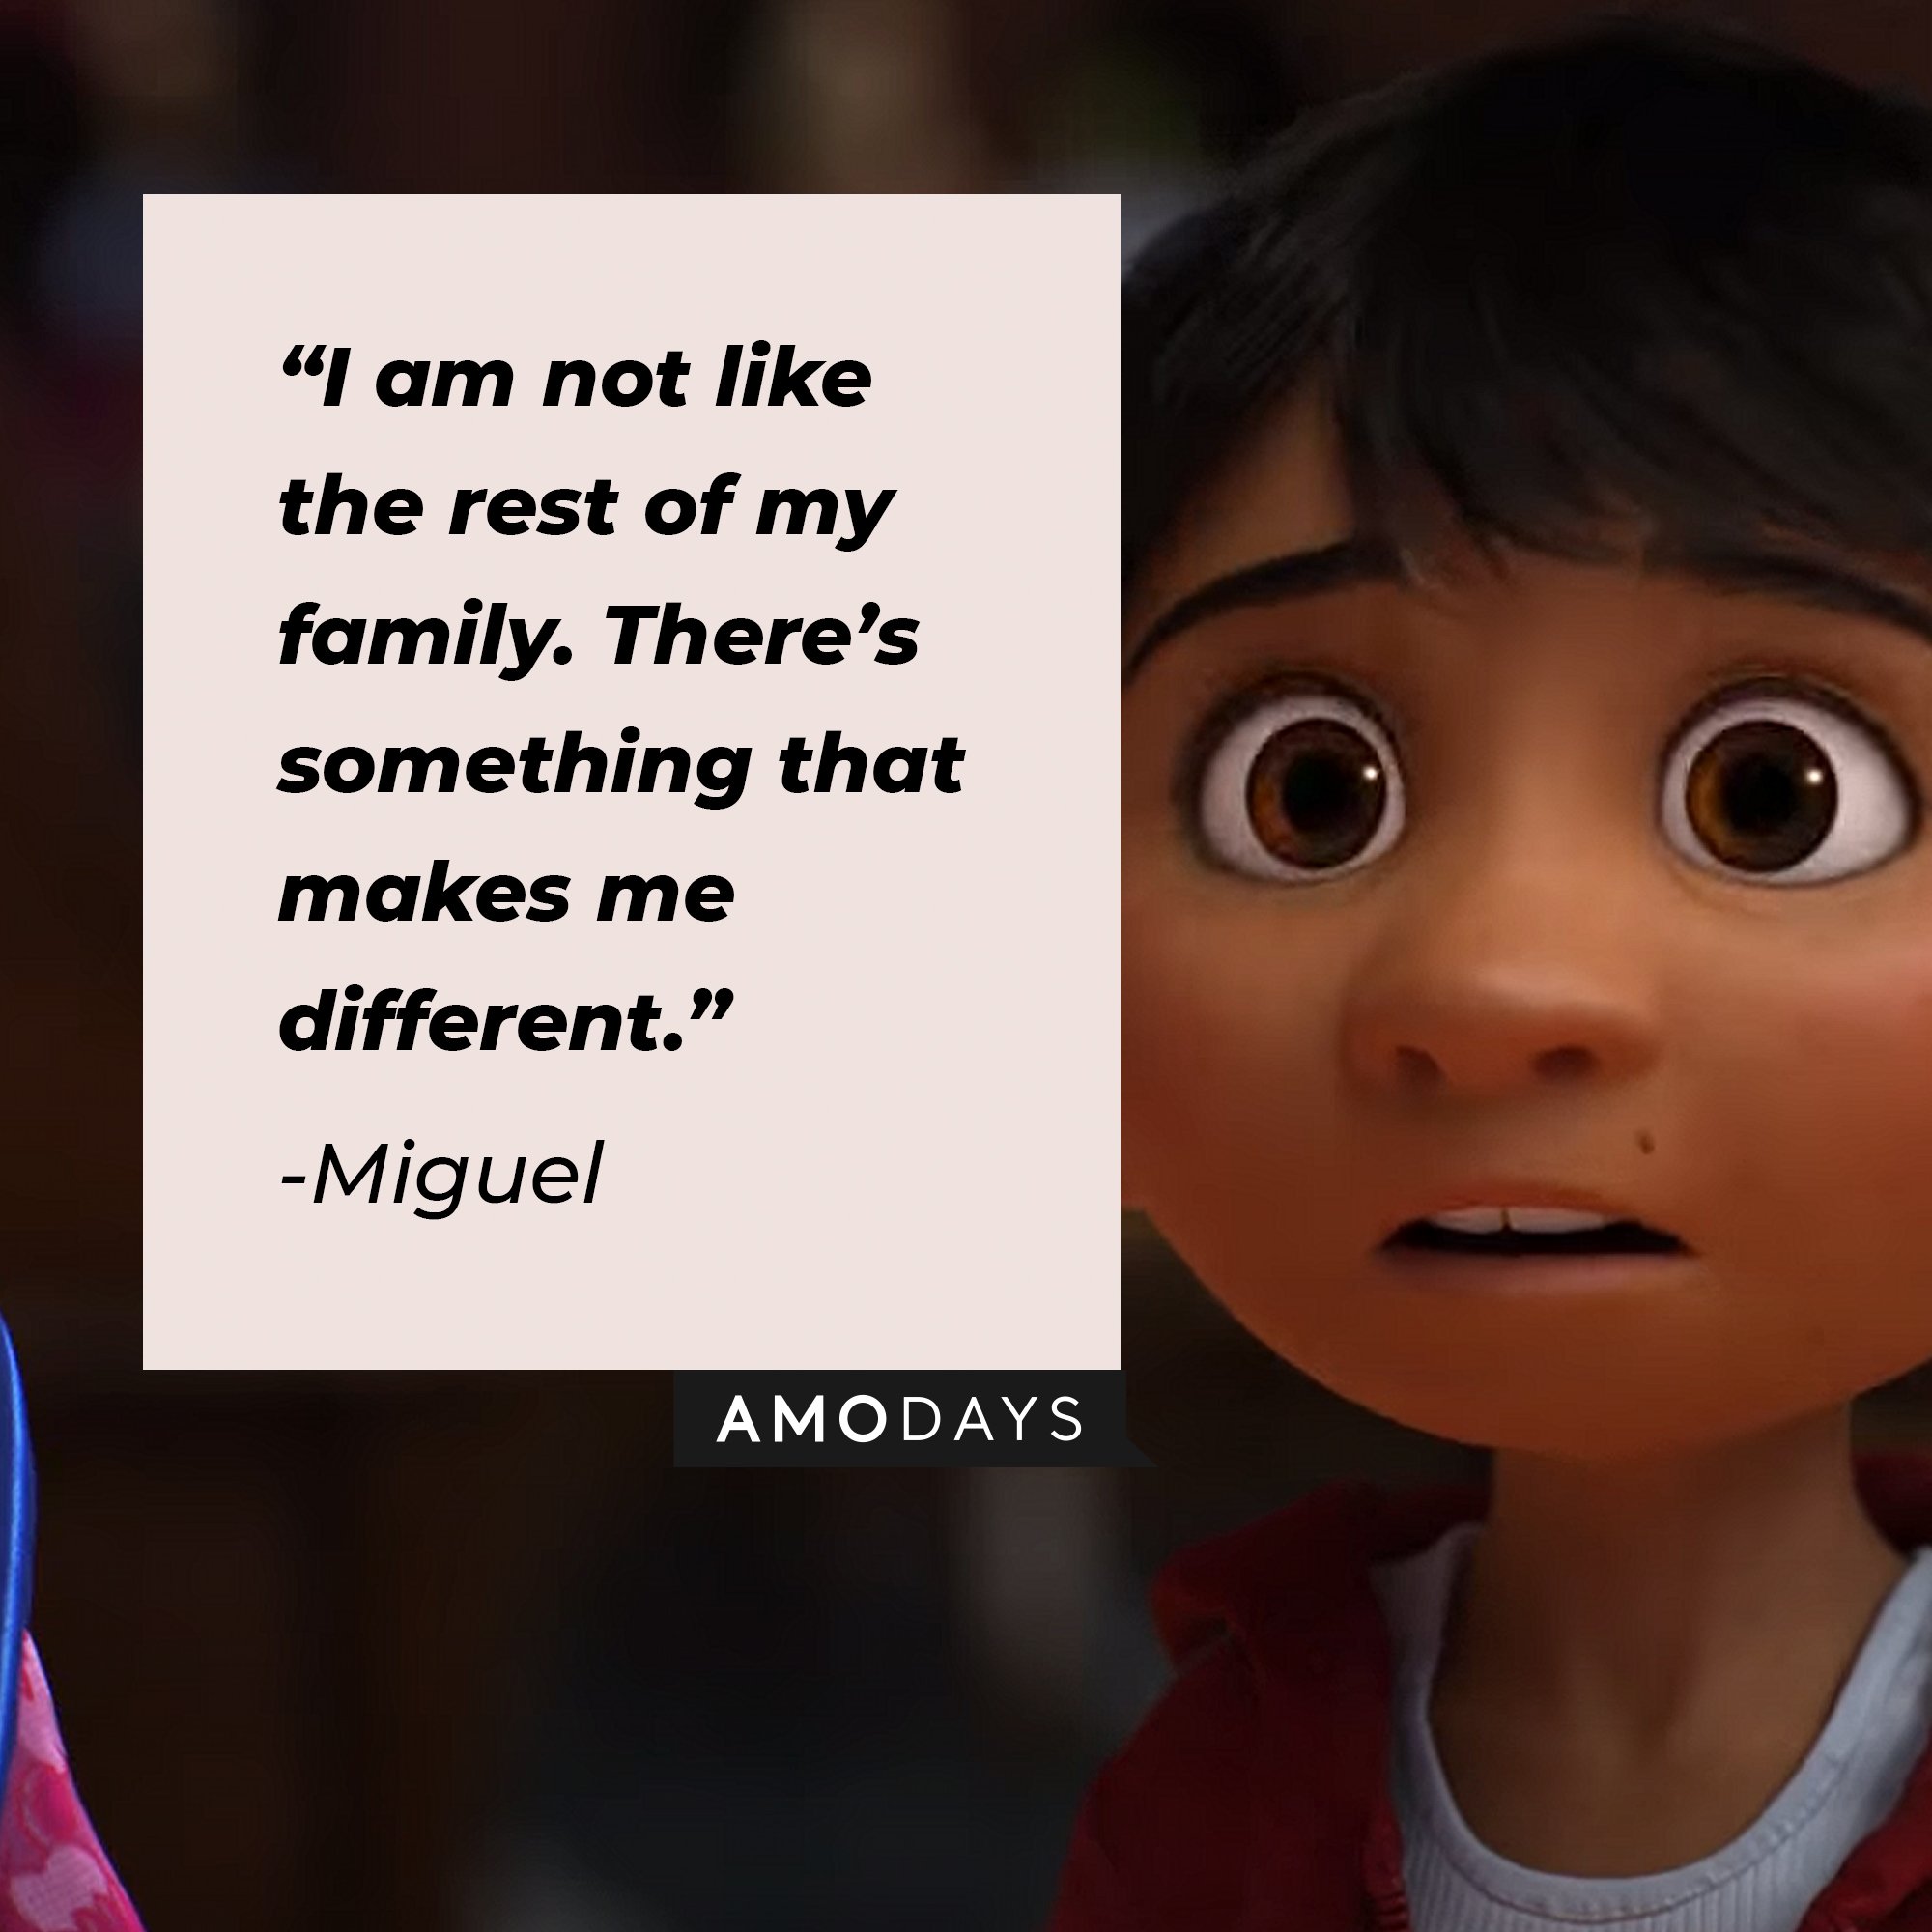 Miguel's quote: “I am not like the rest of my family. There’s something that makes me different.” | Image: AmoDays